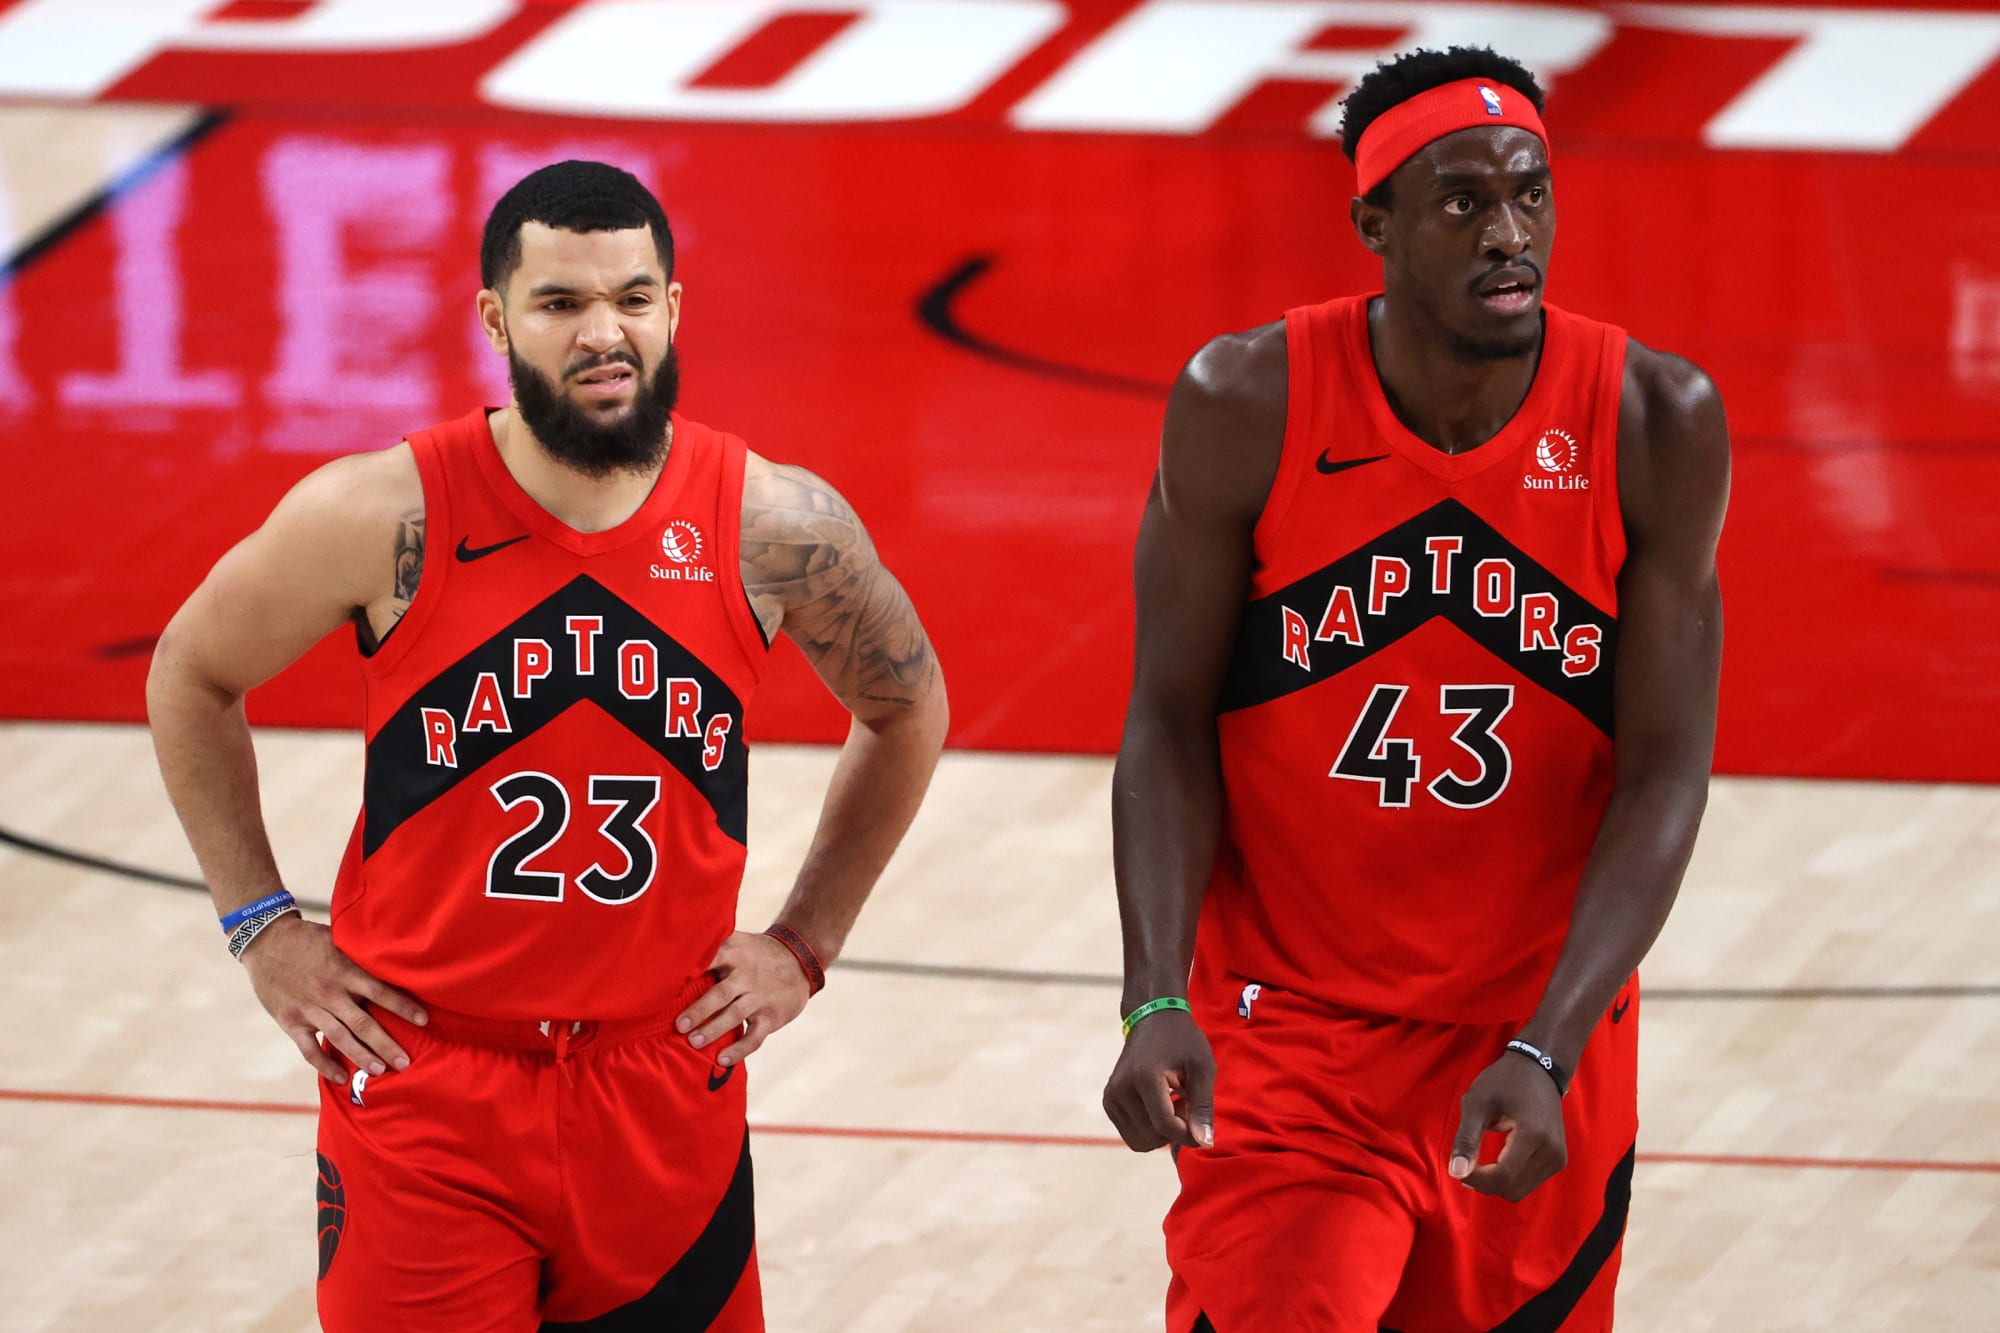 Pascal Siakam not named as an All-Star reserve - Raptors Republic